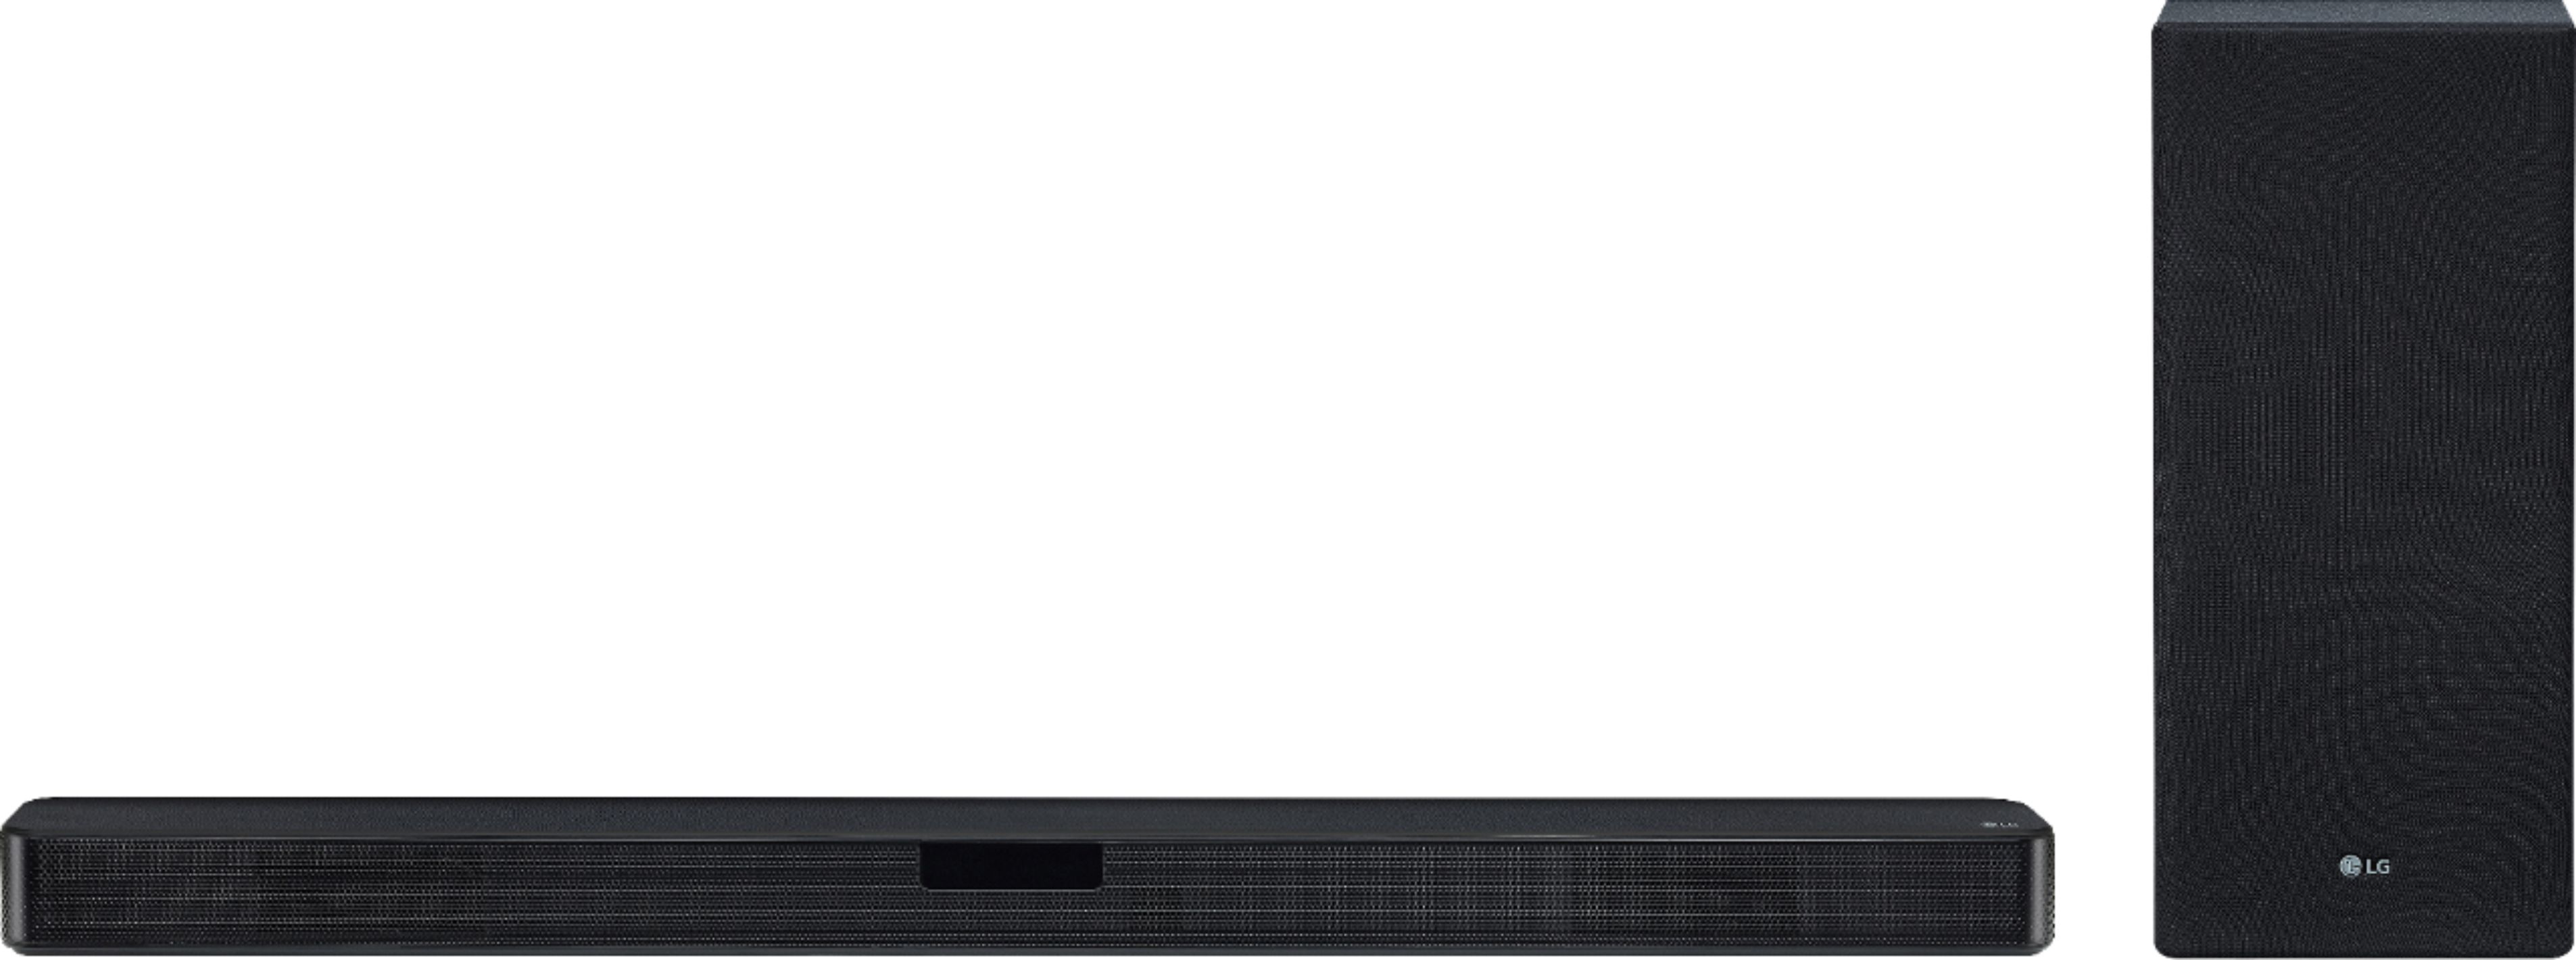 Customer Reviews: LG 2.1-Channel Soundbar with Wireless Subwoofer and DTS Virtual: X Black LG - Best Buy